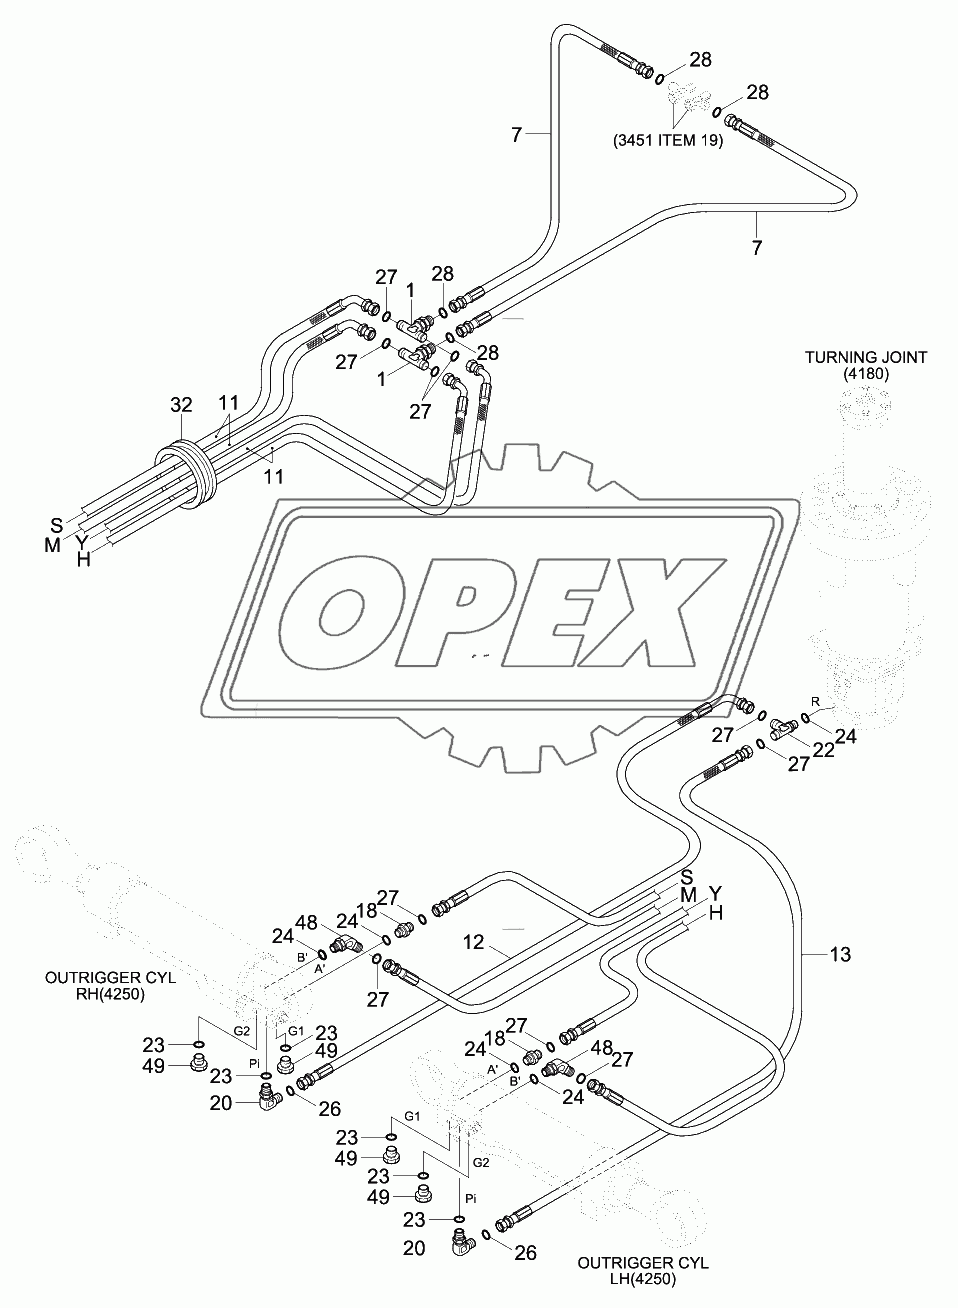 LOWER HYD PIPING 2 (4-OUTRIGGER, #0067-)